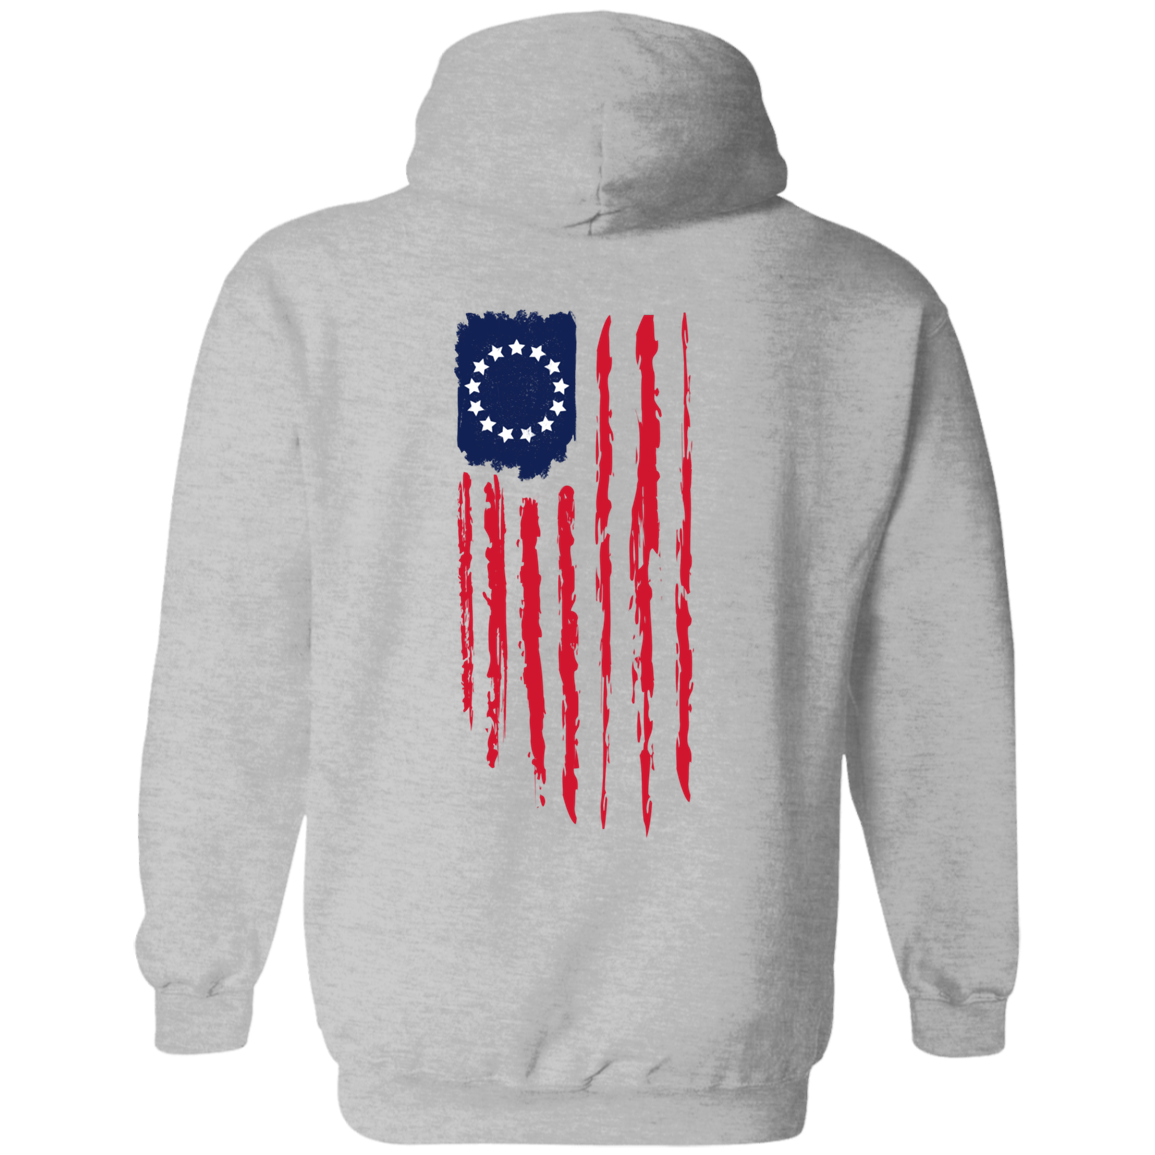 Betsy Ross Flag Pullover Hoodie - Unisex